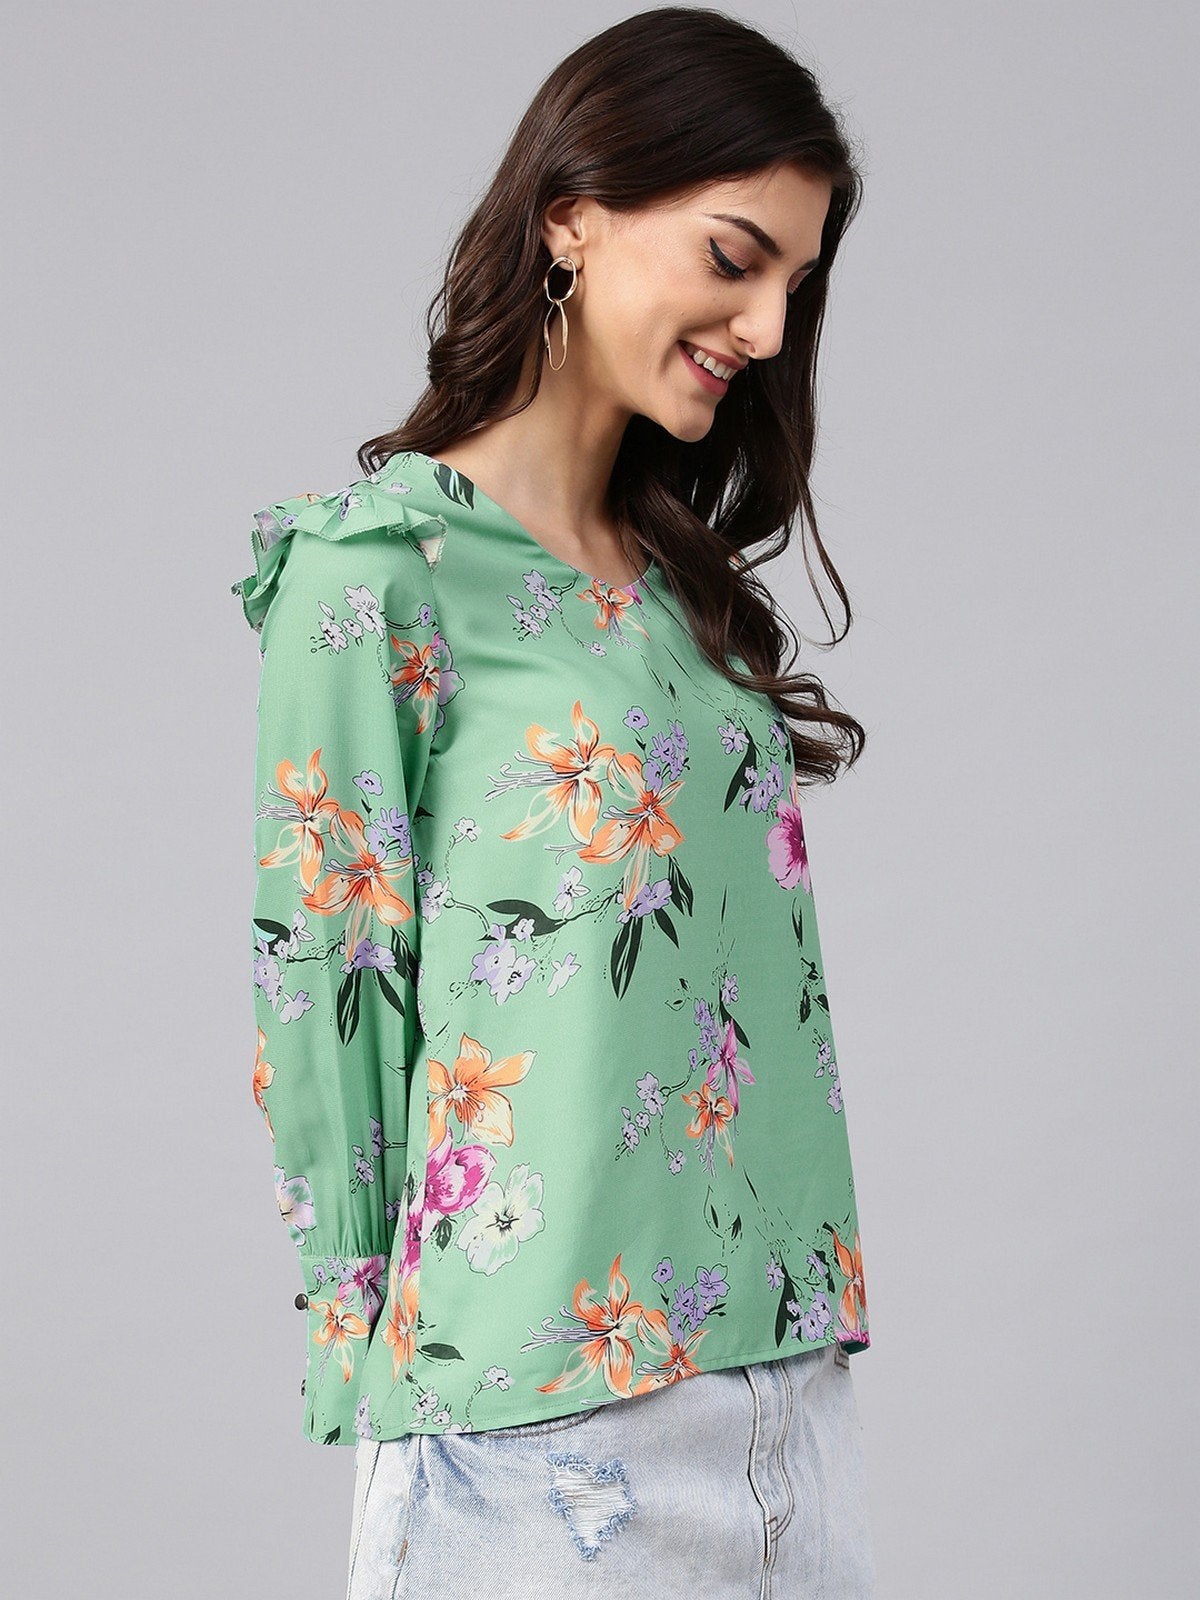 Women's Green Floral Print Top With Shoulder Ruffles - Pannkh